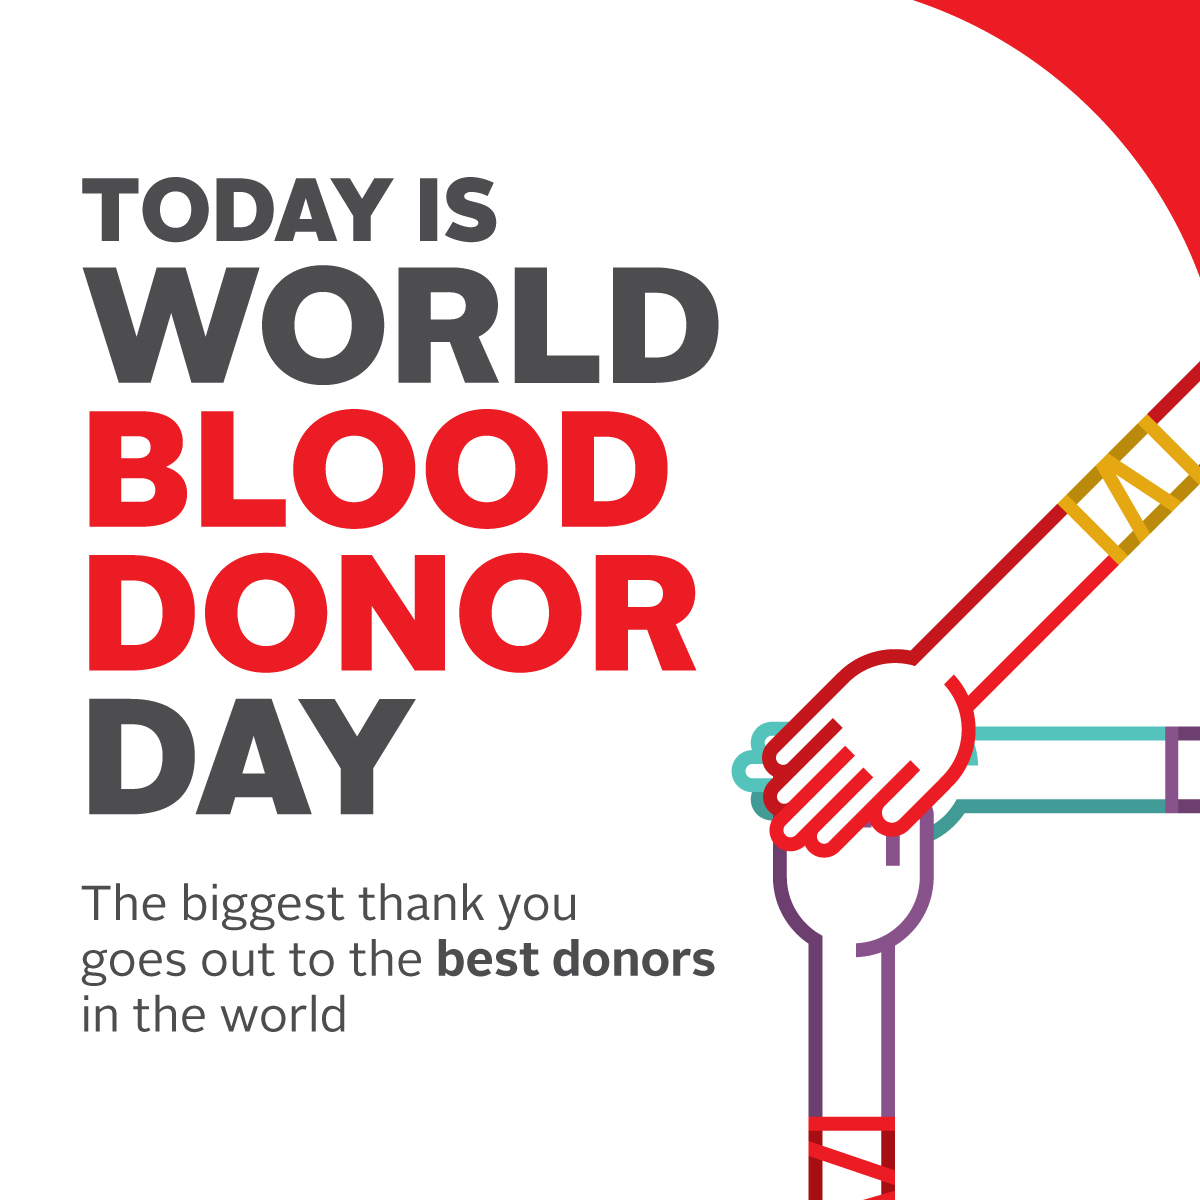 The biggest #ThankYou goes out to the best donors in the world ❤️ 🌍  

Without our donors and supporters alike, we wouldn’t be able to serve patients in need in Canada. You truly do make all the difference. 

#CanadianBloodServices #WBDD